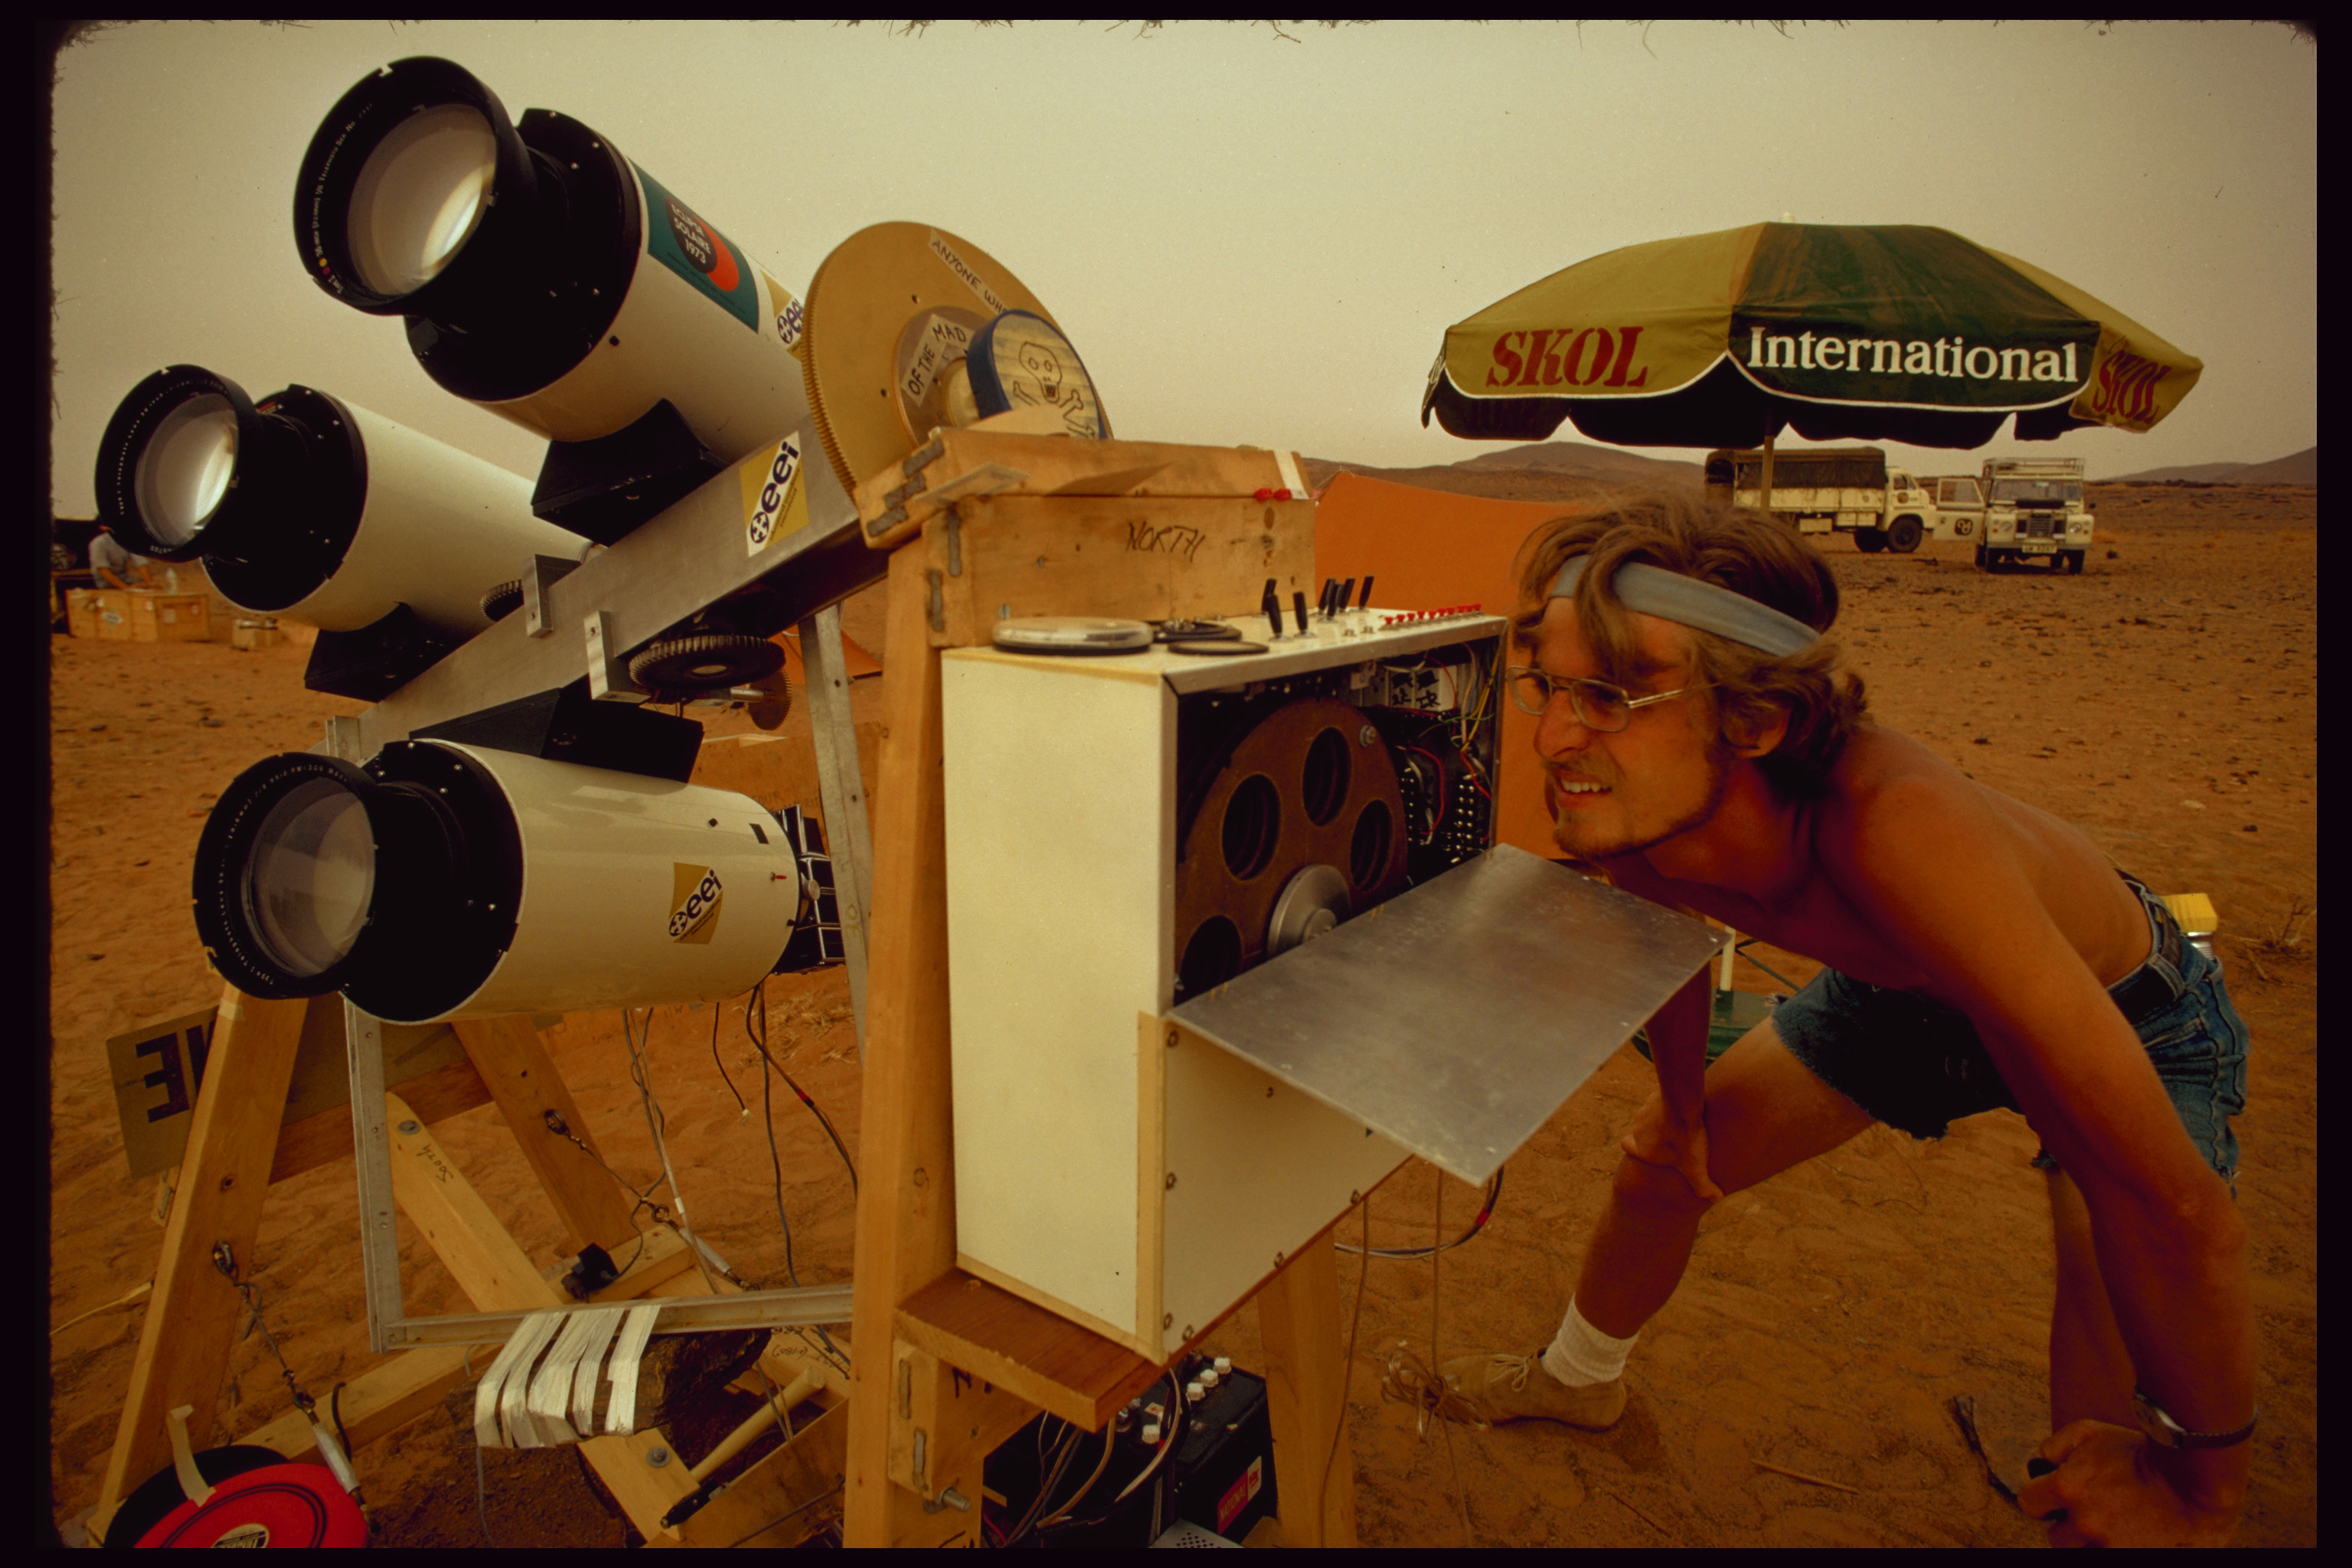 A man wearing denim shorts and no shirt inspects his telescope and viewing equipment.